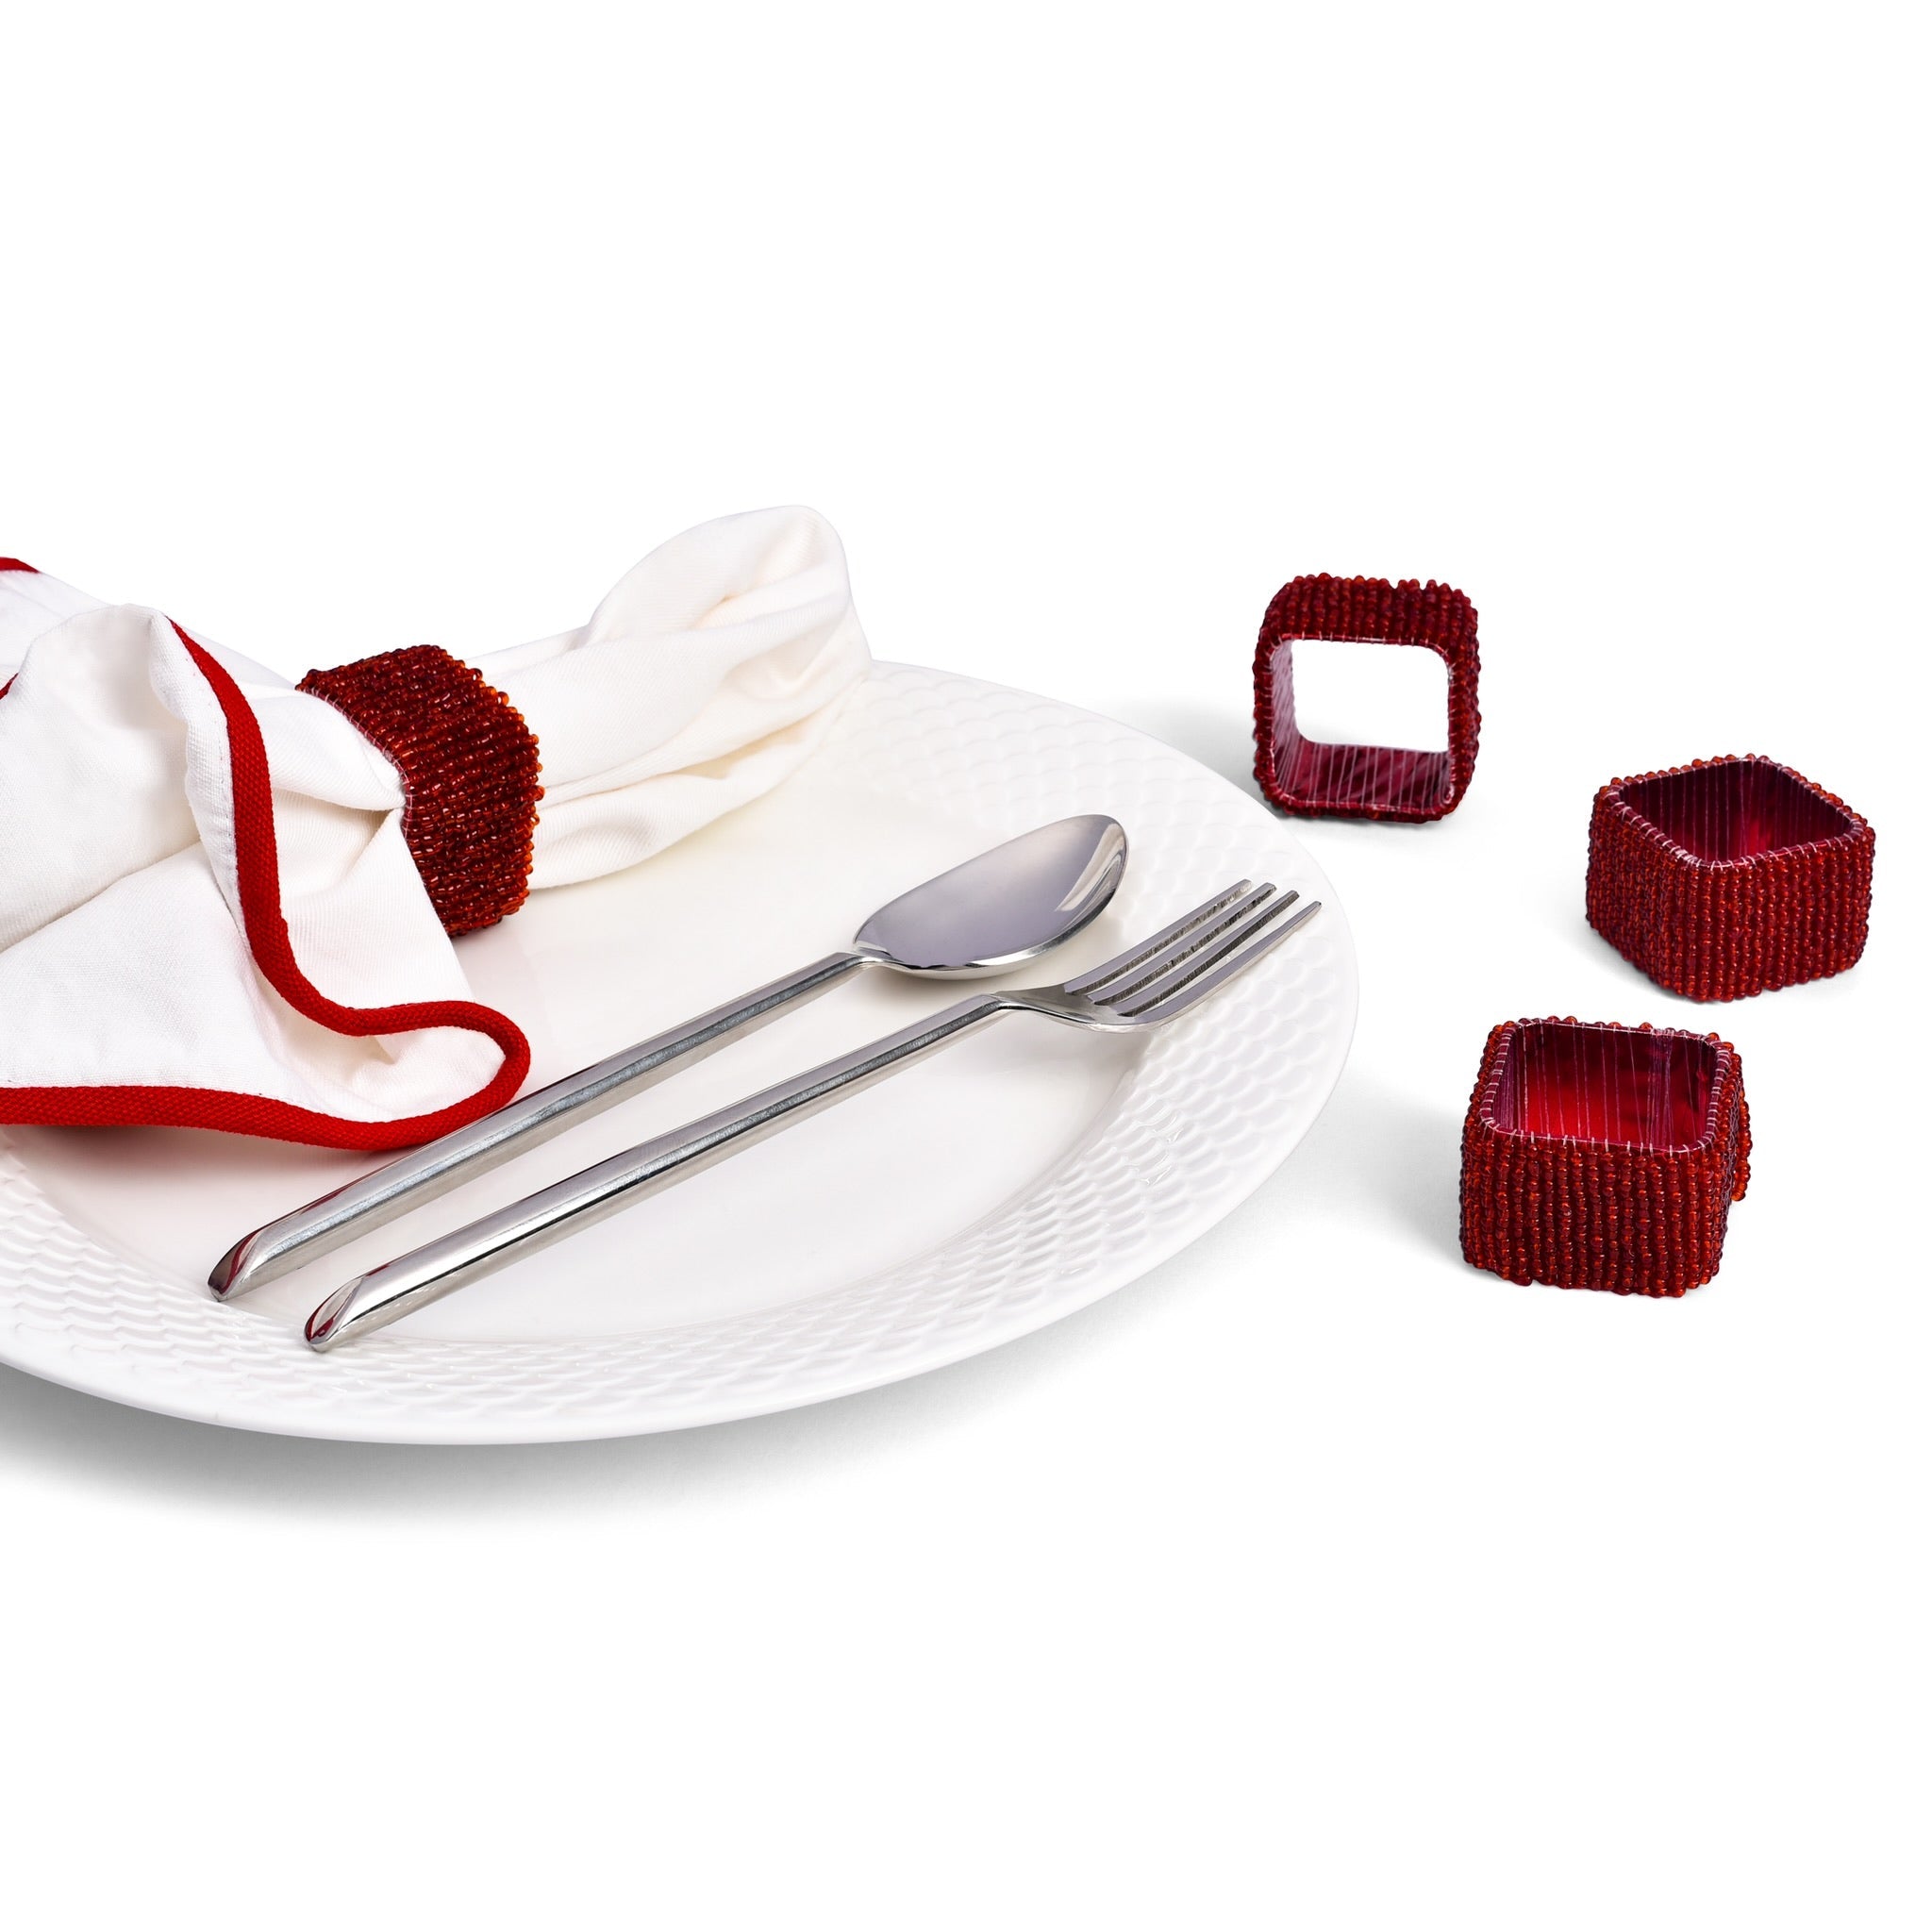 Classic Square Napkin Ring in Red, Set of 4